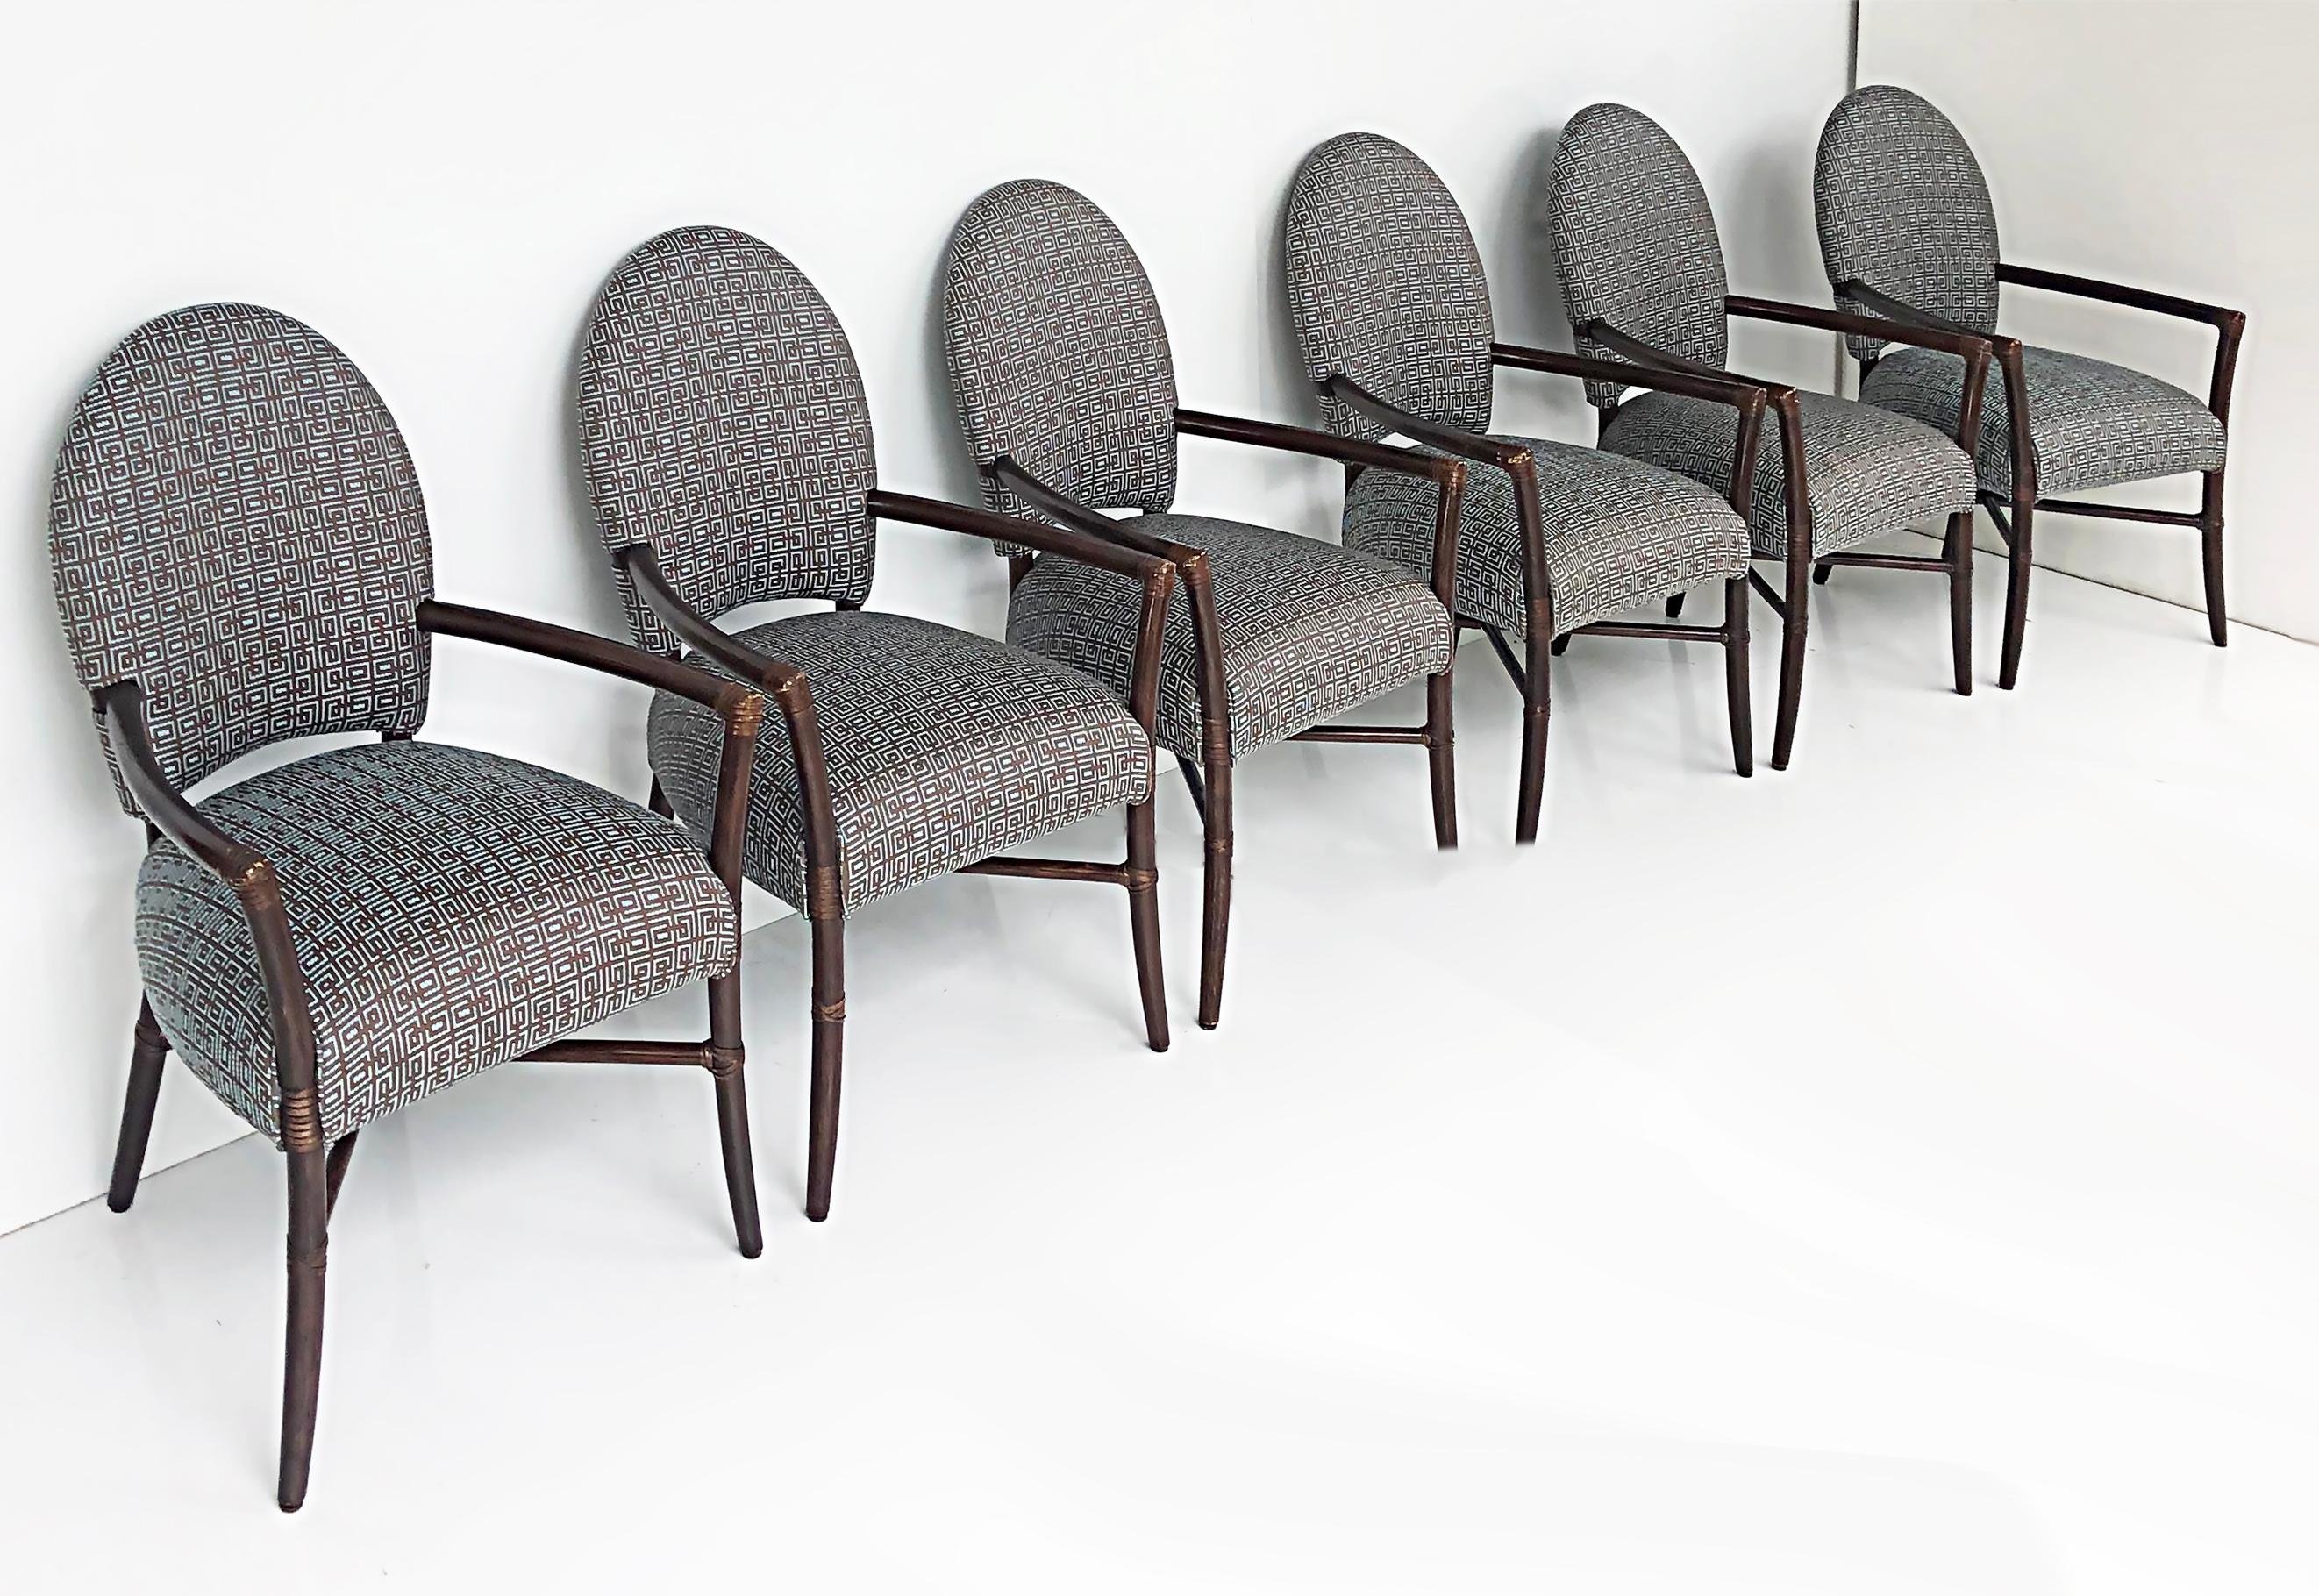 Vintage McGuire San Francisco dining armchairs, upholstered Set of 6 

Offered for sale is an elegant set of 6 upholstered McGuire San Francisco dining armchairs. The frames are wrapped in leather at the joins and the seats and backs are